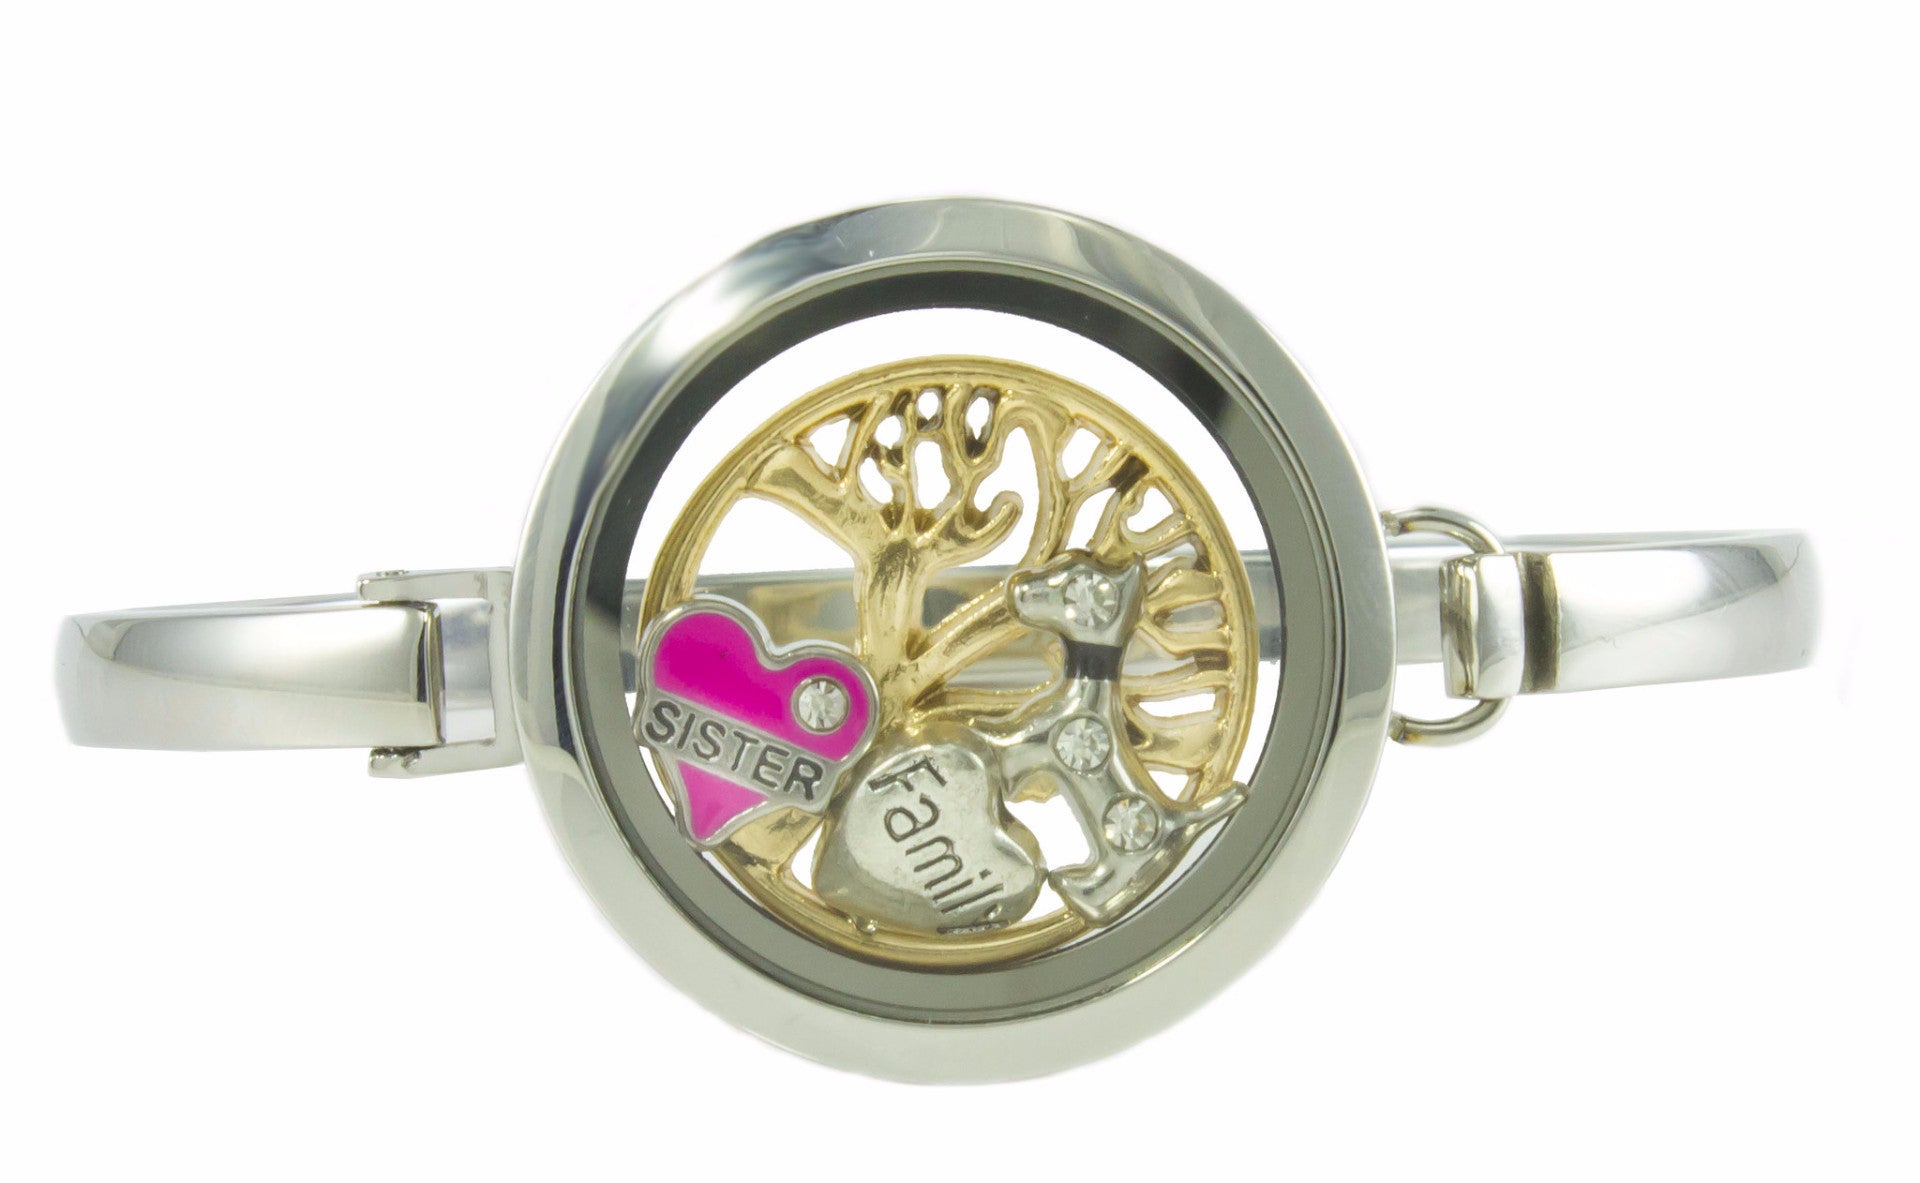 Floating Locket Bangle Bracelet with Choice of 6 Charms and 1 Plate (Silver No Stone)